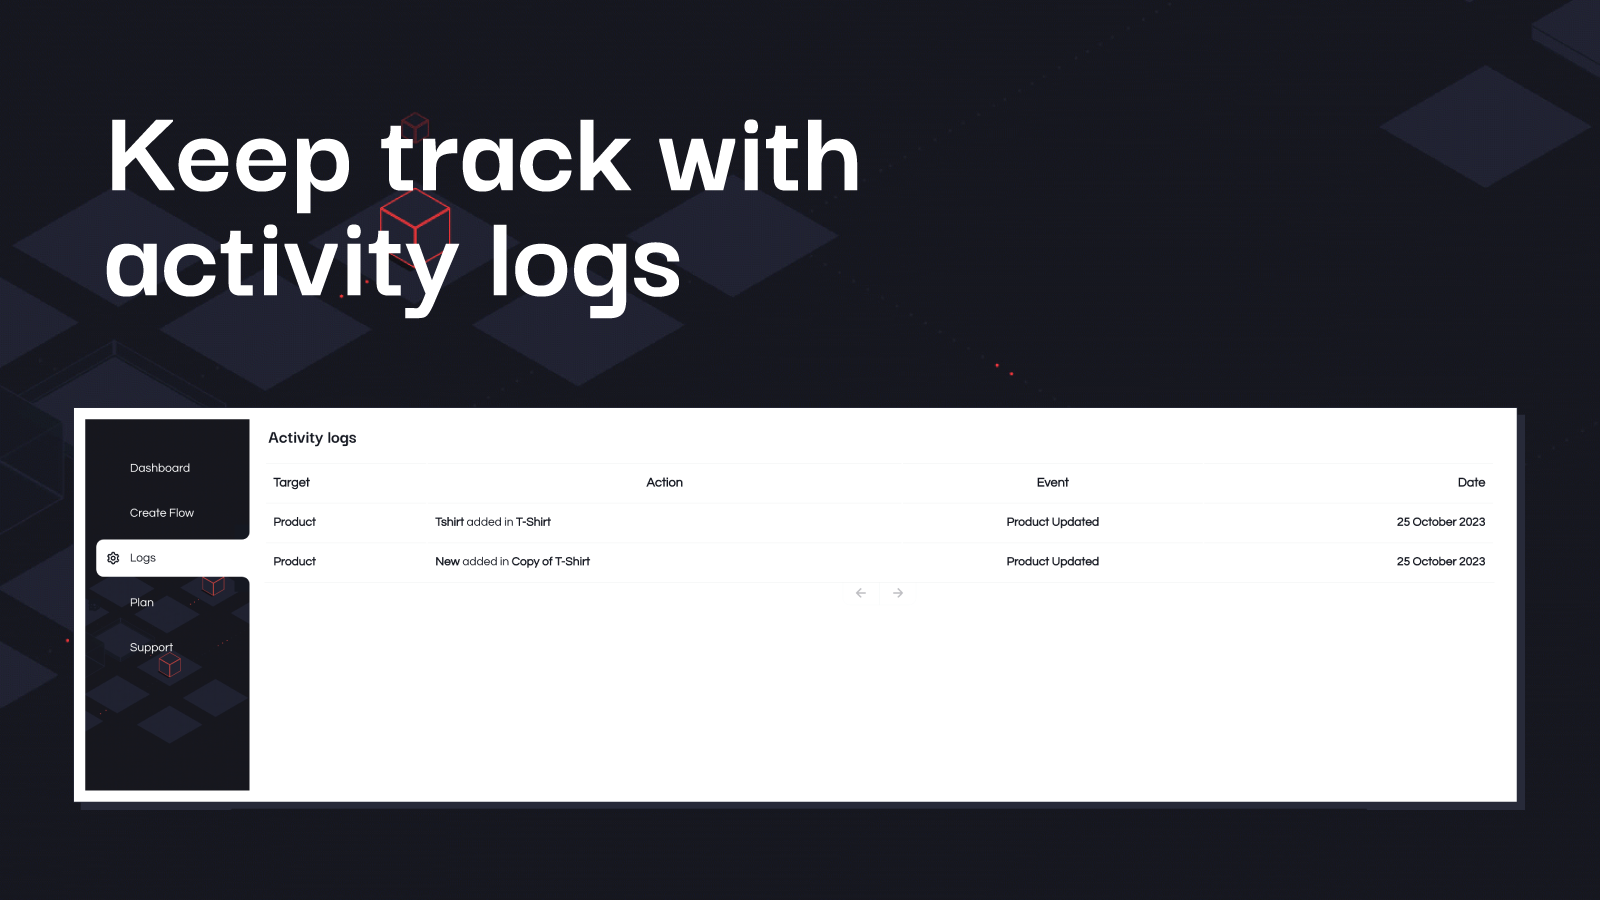 Keep track with activity logs